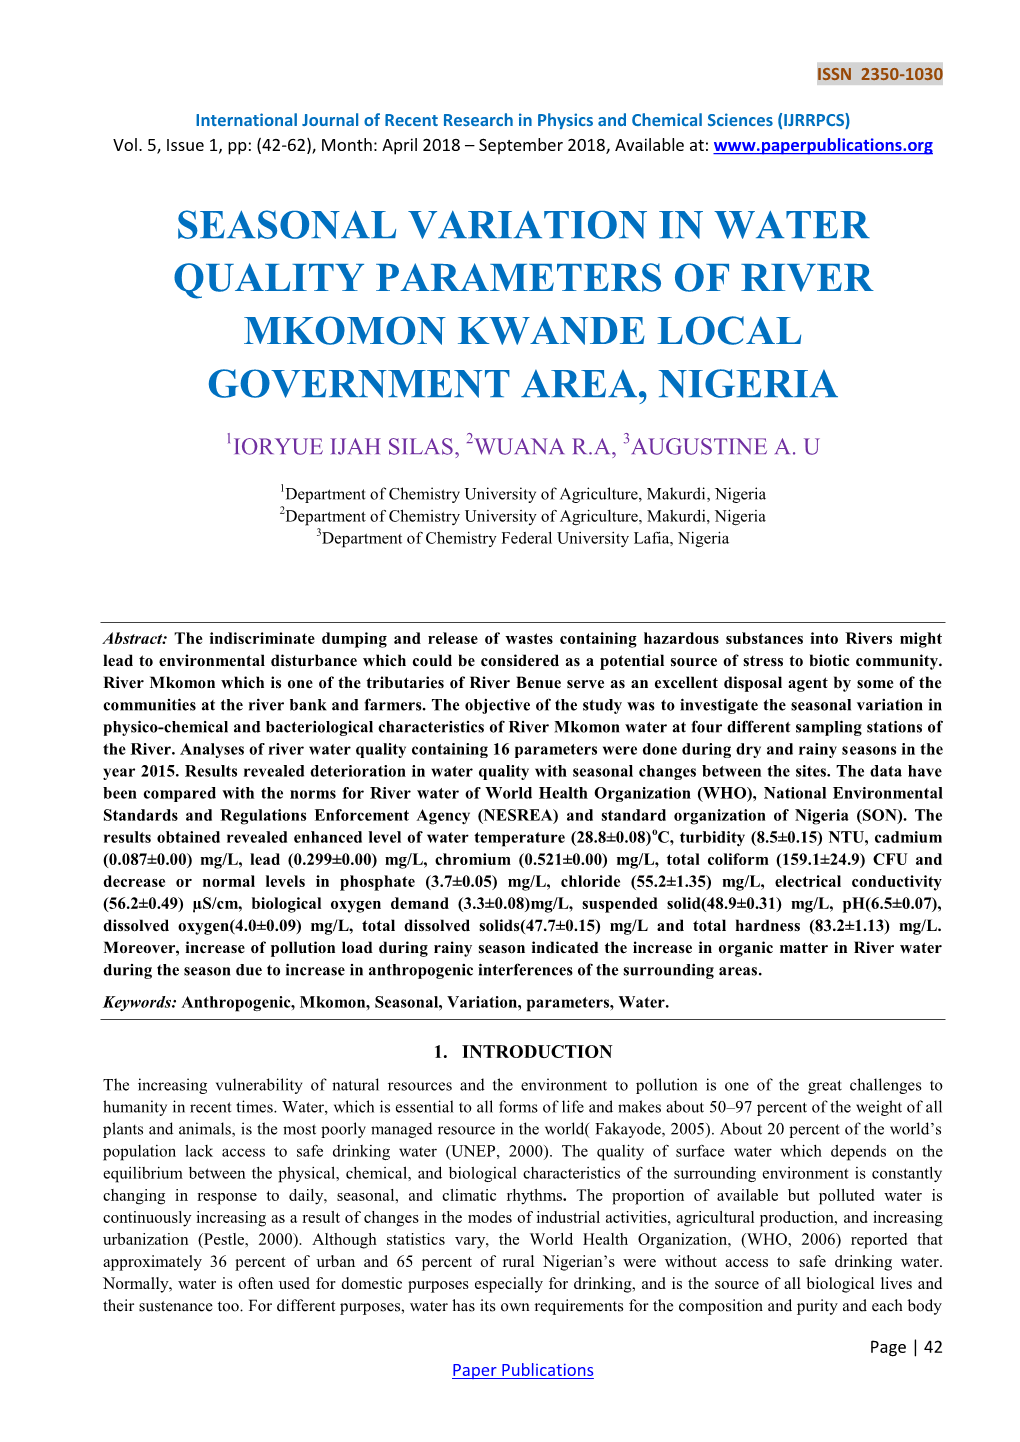 Seasonal Variation in Water Quality Parameters of River Mkomon Kwande Local Government Area, Nigeria